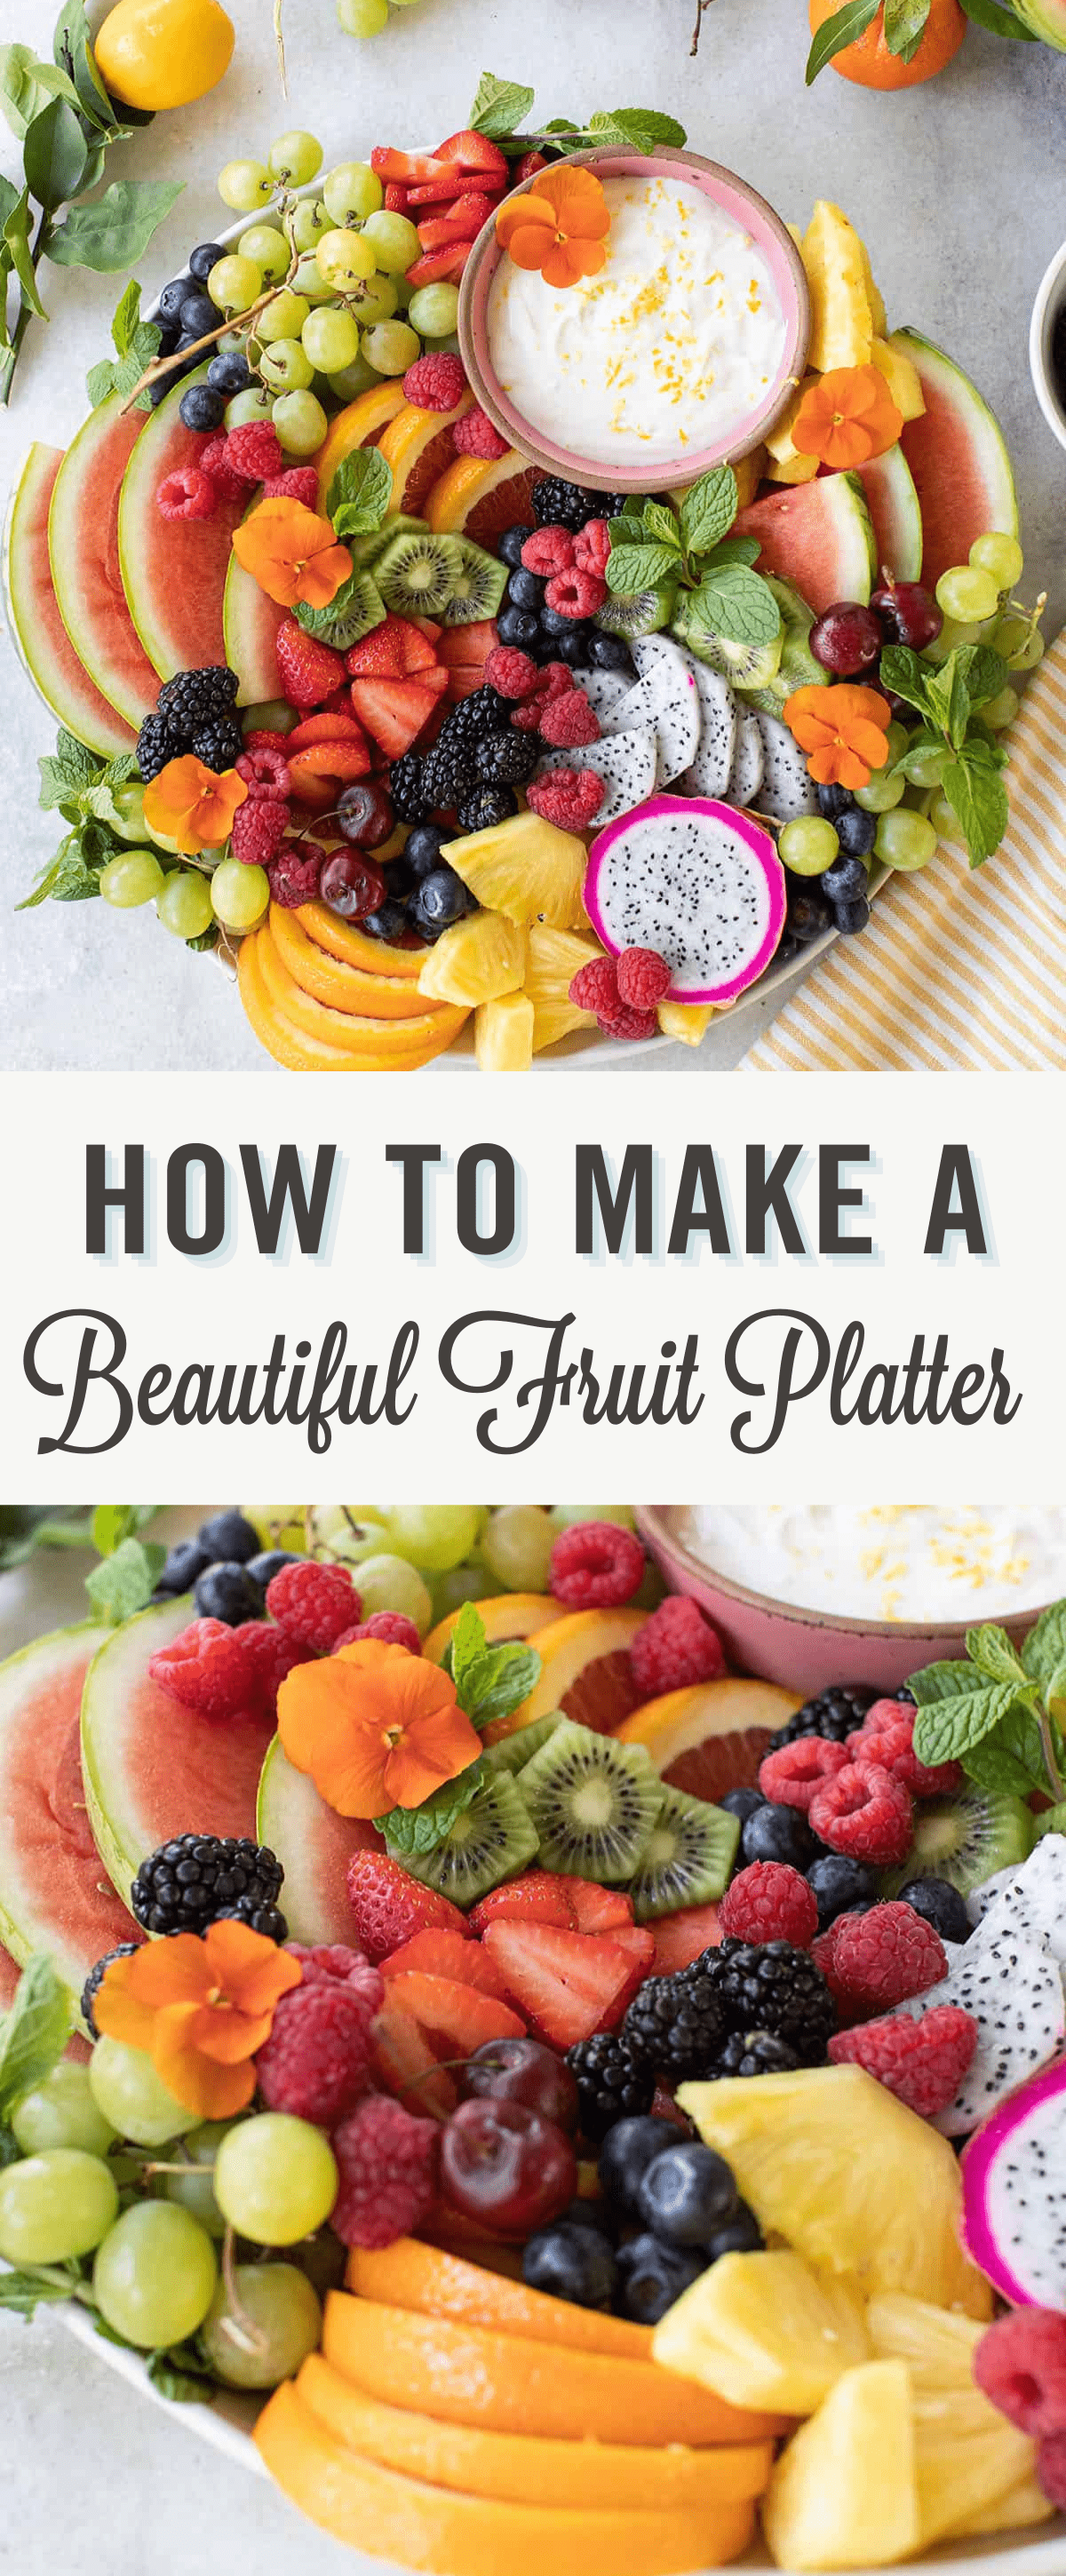 How to make a fruit platter images and text.